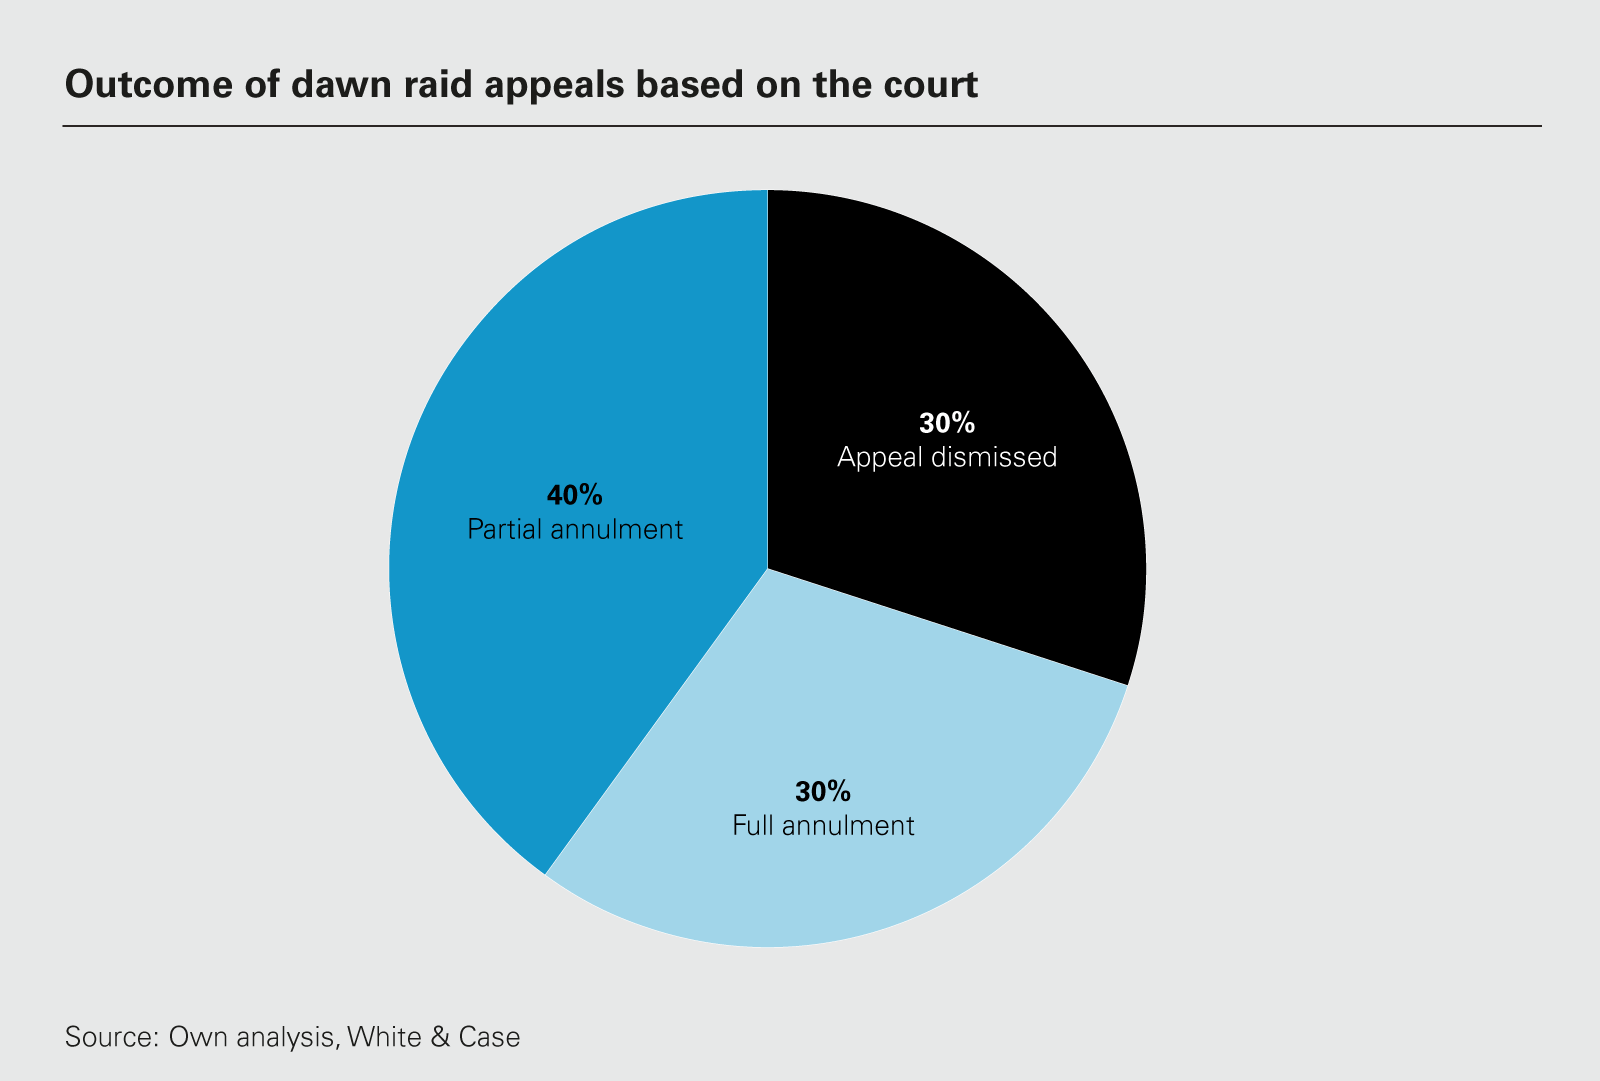 Outcome of DR appeals based on the Court